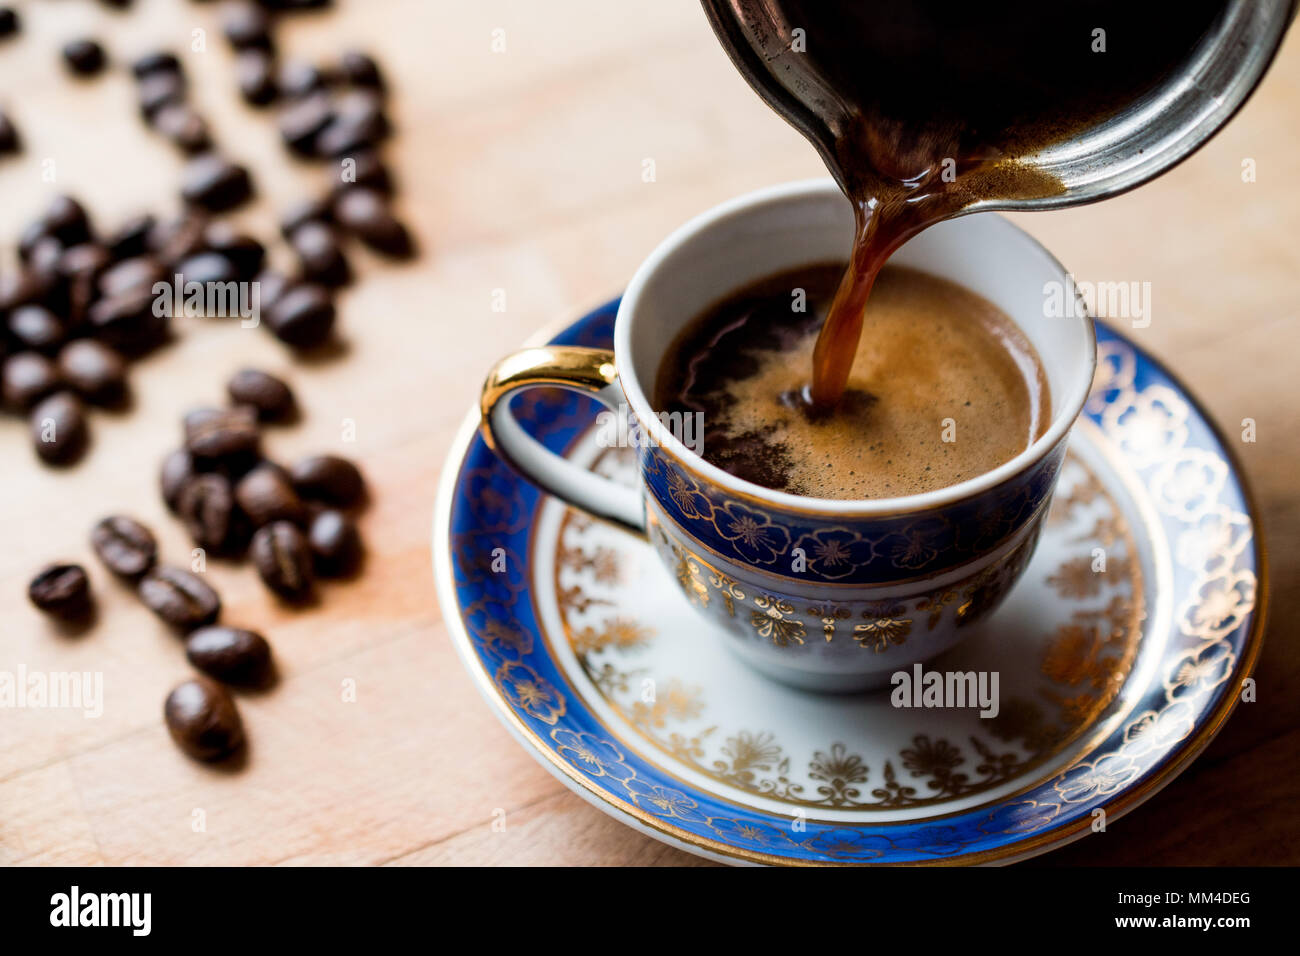 https://c8.alamy.com/comp/MM4DEG/pouring-turkish-coffee-into-traditional-cup-traditional-beverage-MM4DEG.jpg